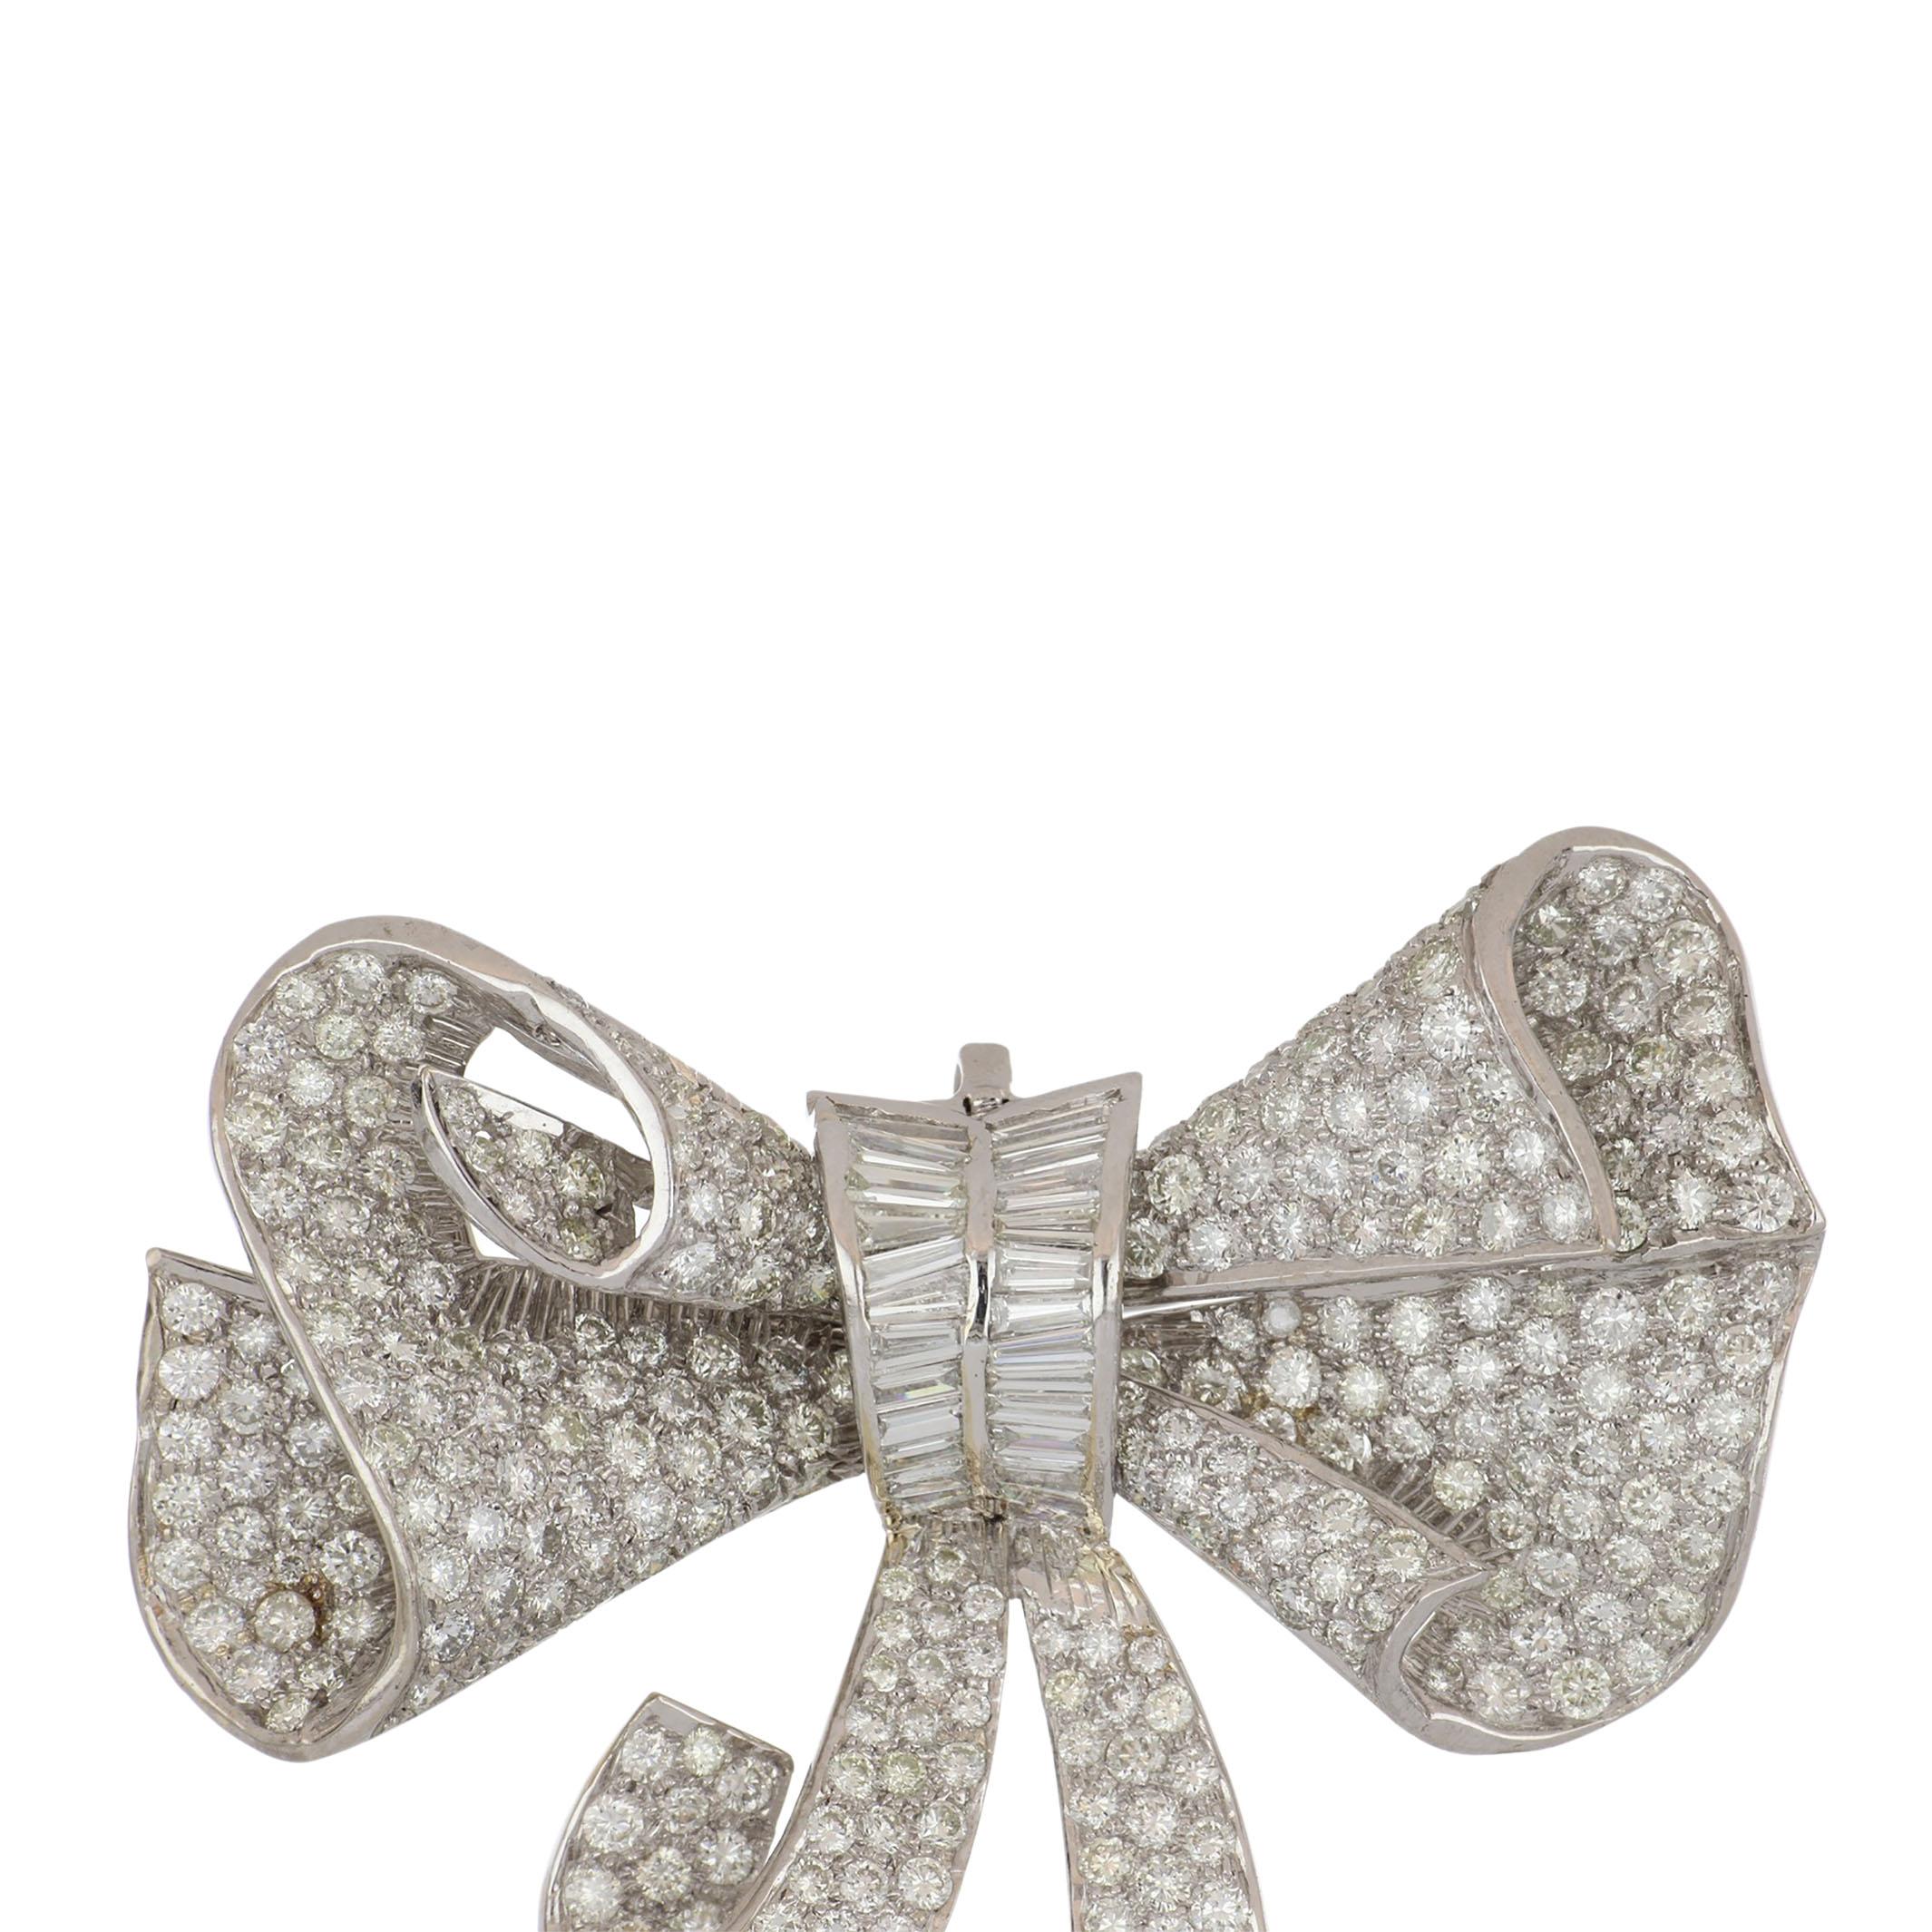 Mid-century 18K white gold bow brooch with 323 round and baguette diamonds that total 13.65 carats; G-I color and VS clarity.  There is also a bale so it can be worn as a pendant.  Circa 1960.  The brooch measures 2.25 x 2 inches.